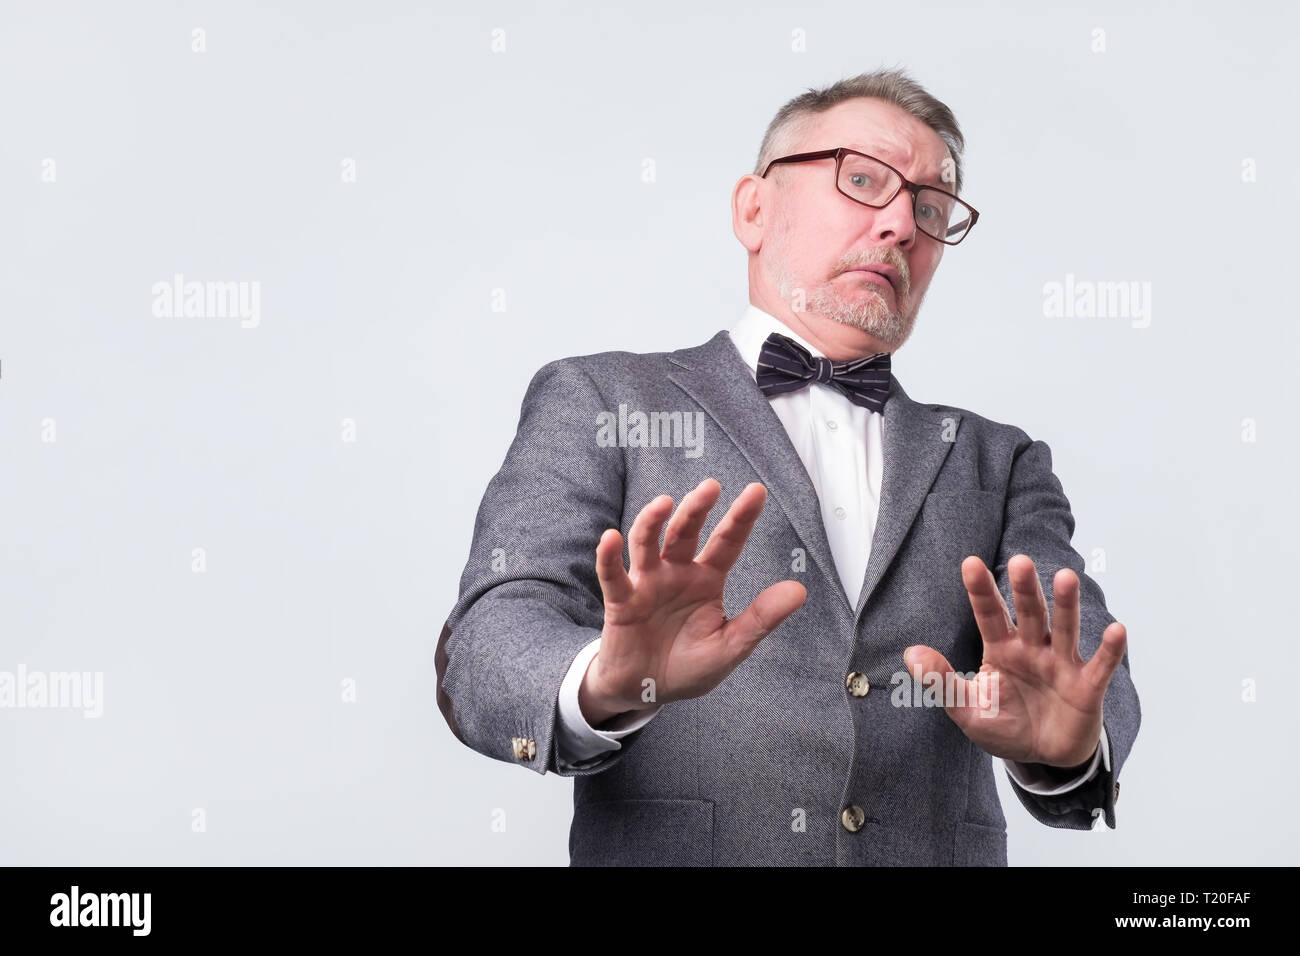 Mature european man in suit and glasses showing refusal gesture. It is not for me, leave me in piece, has angry expression. Studio shoot Stock Photo